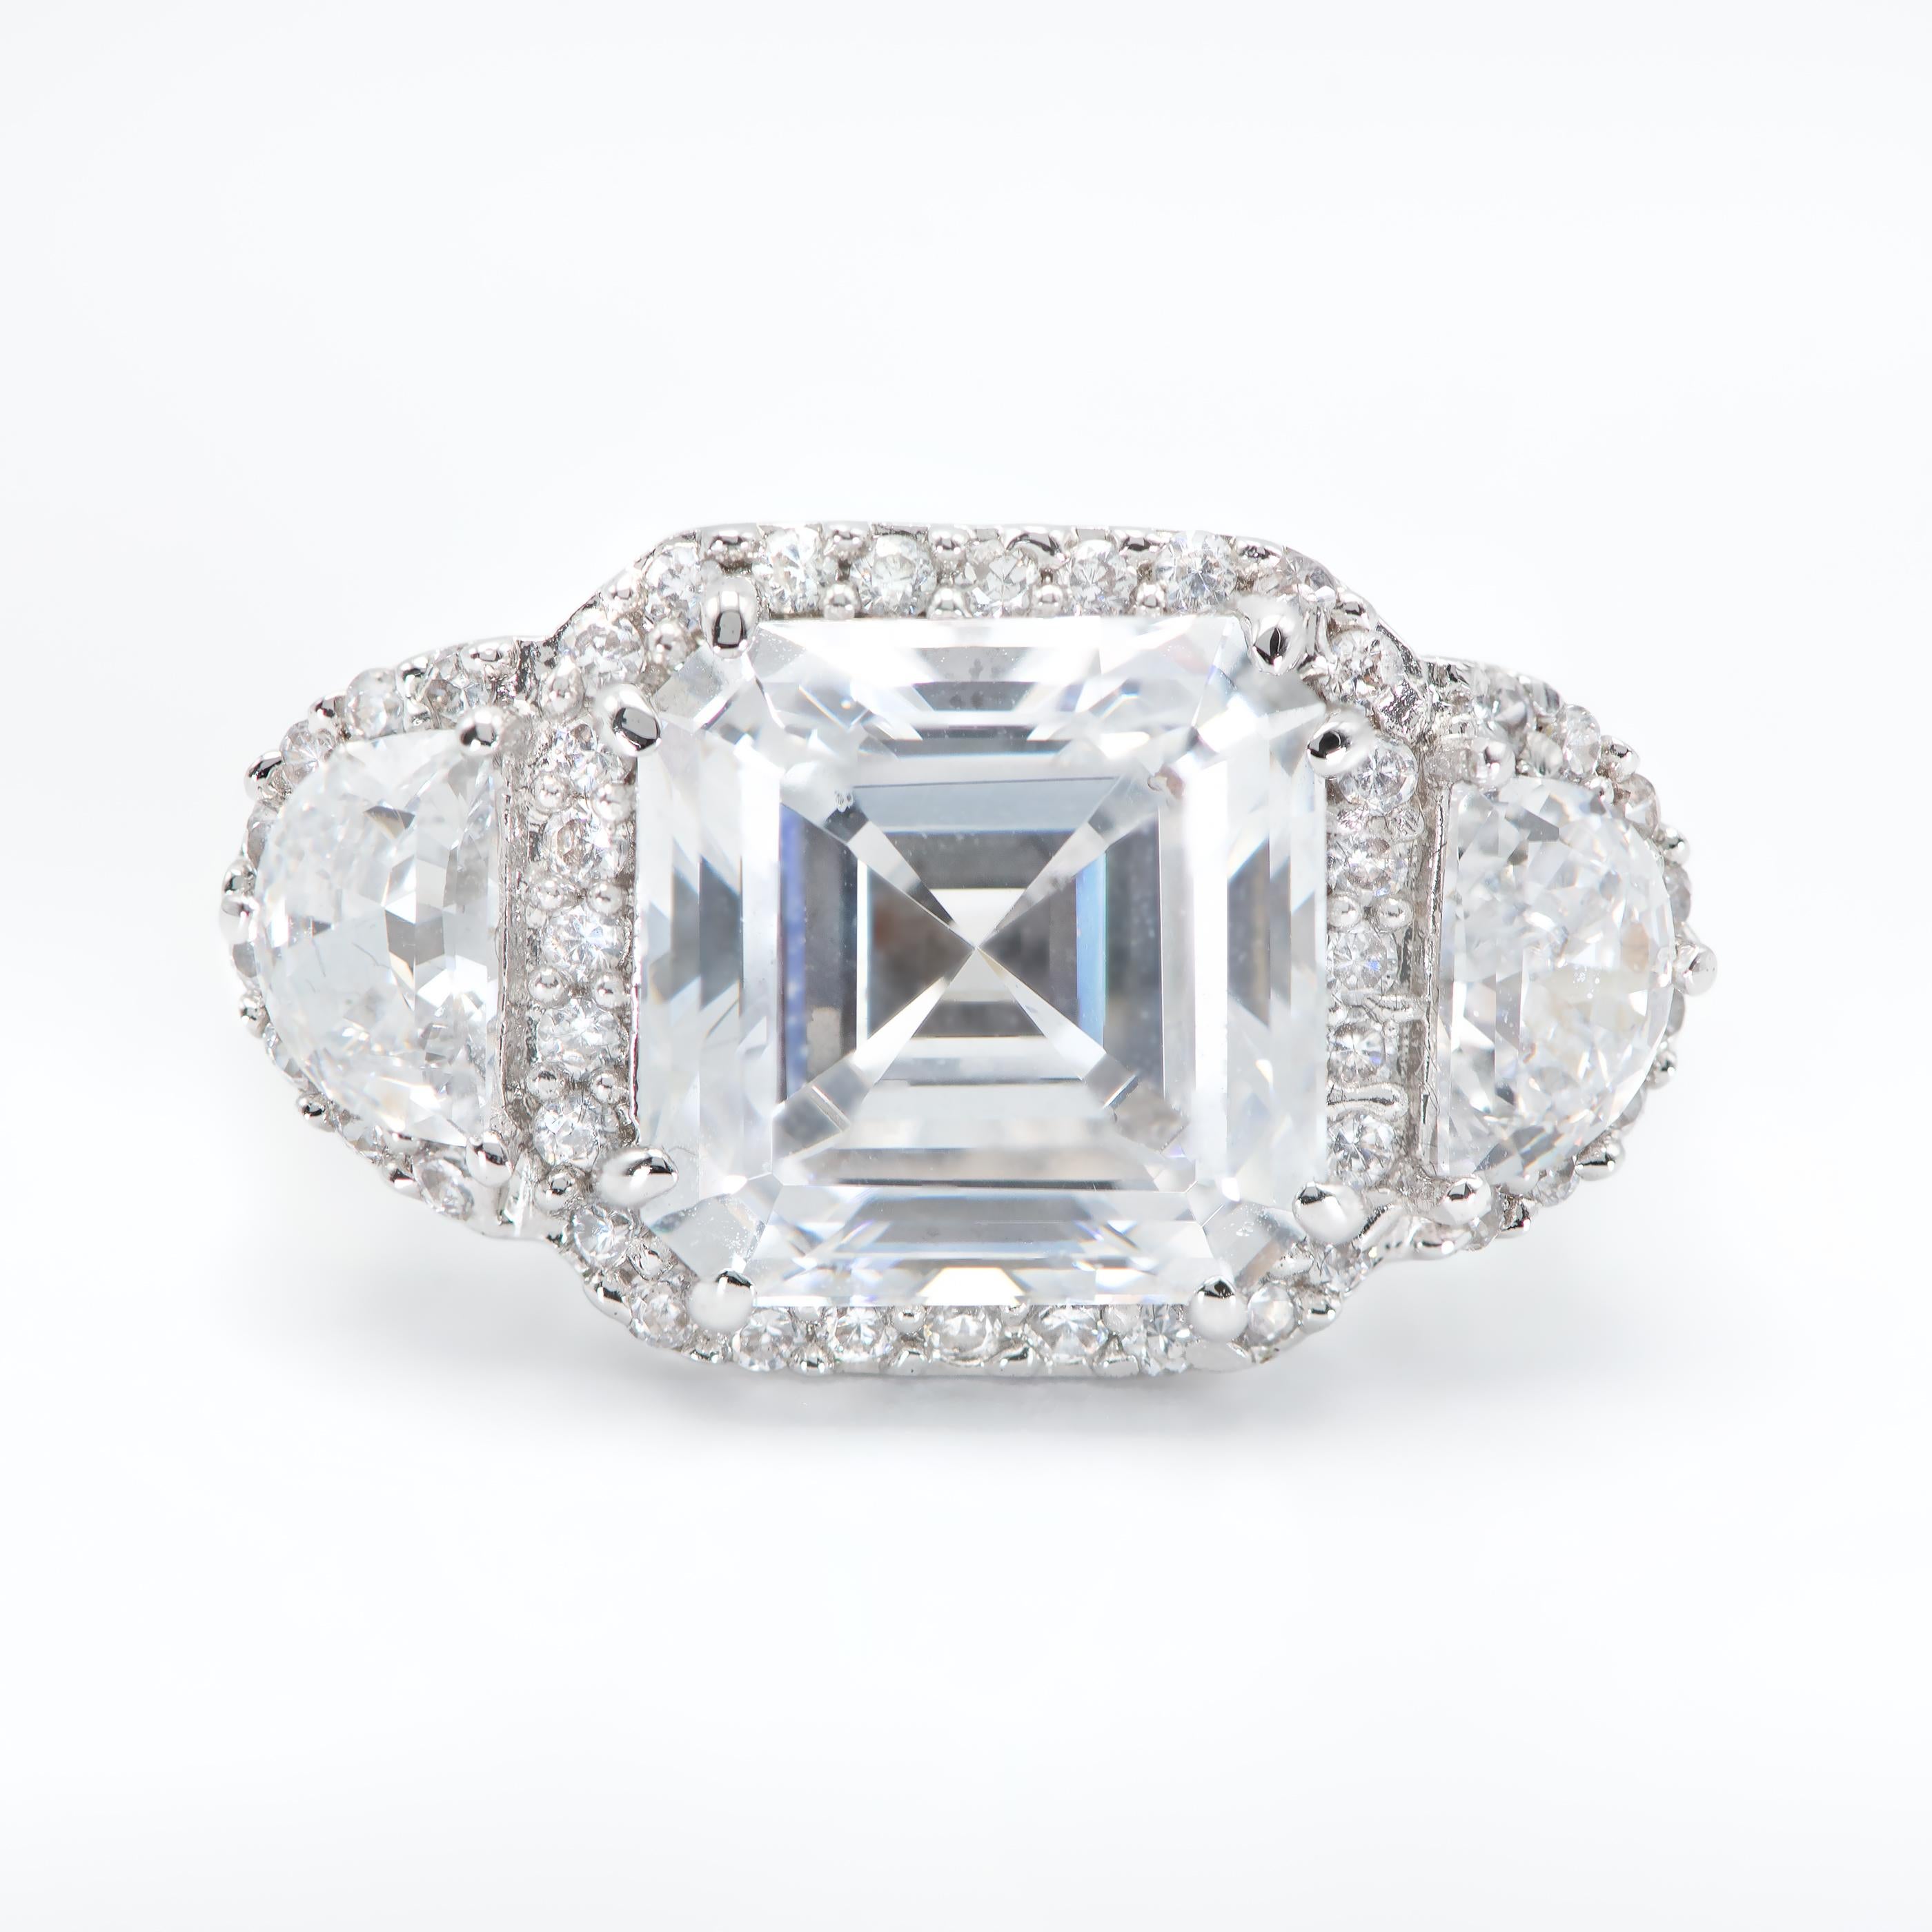 Centered upon a 5 Carat GIA certified Asscher Cut Diamond of I color and VS2 Clarity, flanked by Half Moons weighing 0.80 Carats and surrounded by micro pave set Round Brilliant Diamonds.
Set in Platinum.
Size 6. Can be sized.